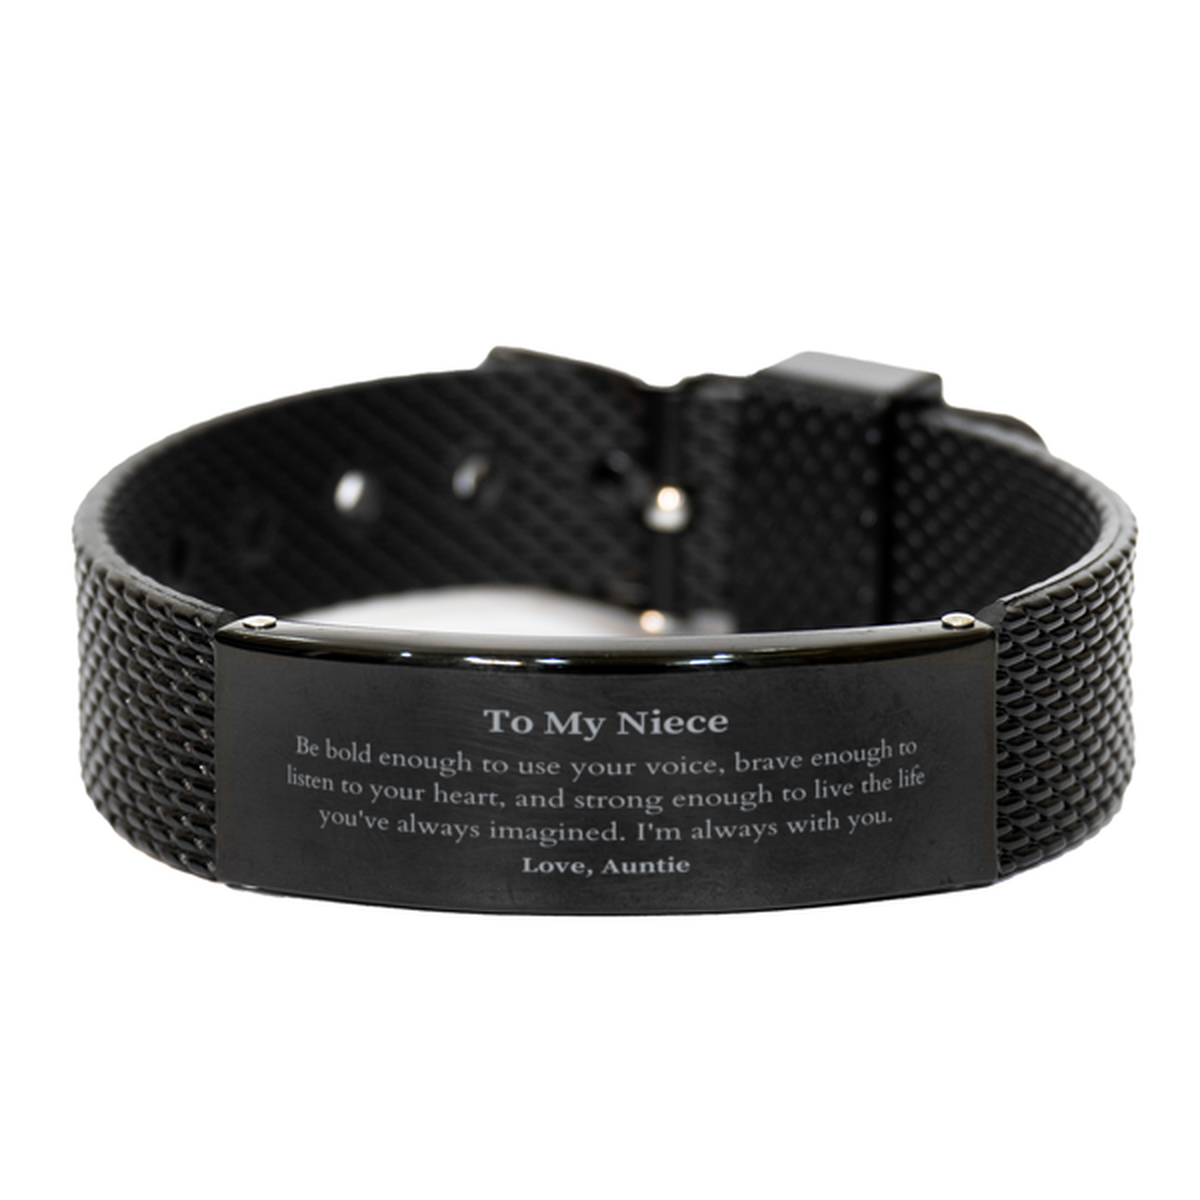 Keepsake Niece Black Shark Mesh Bracelet Gift Idea Graduation Christmas Birthday Niece from Auntie, Niece Be bold enough to use your voice, brave enough to listen to your heart. Love, Auntie